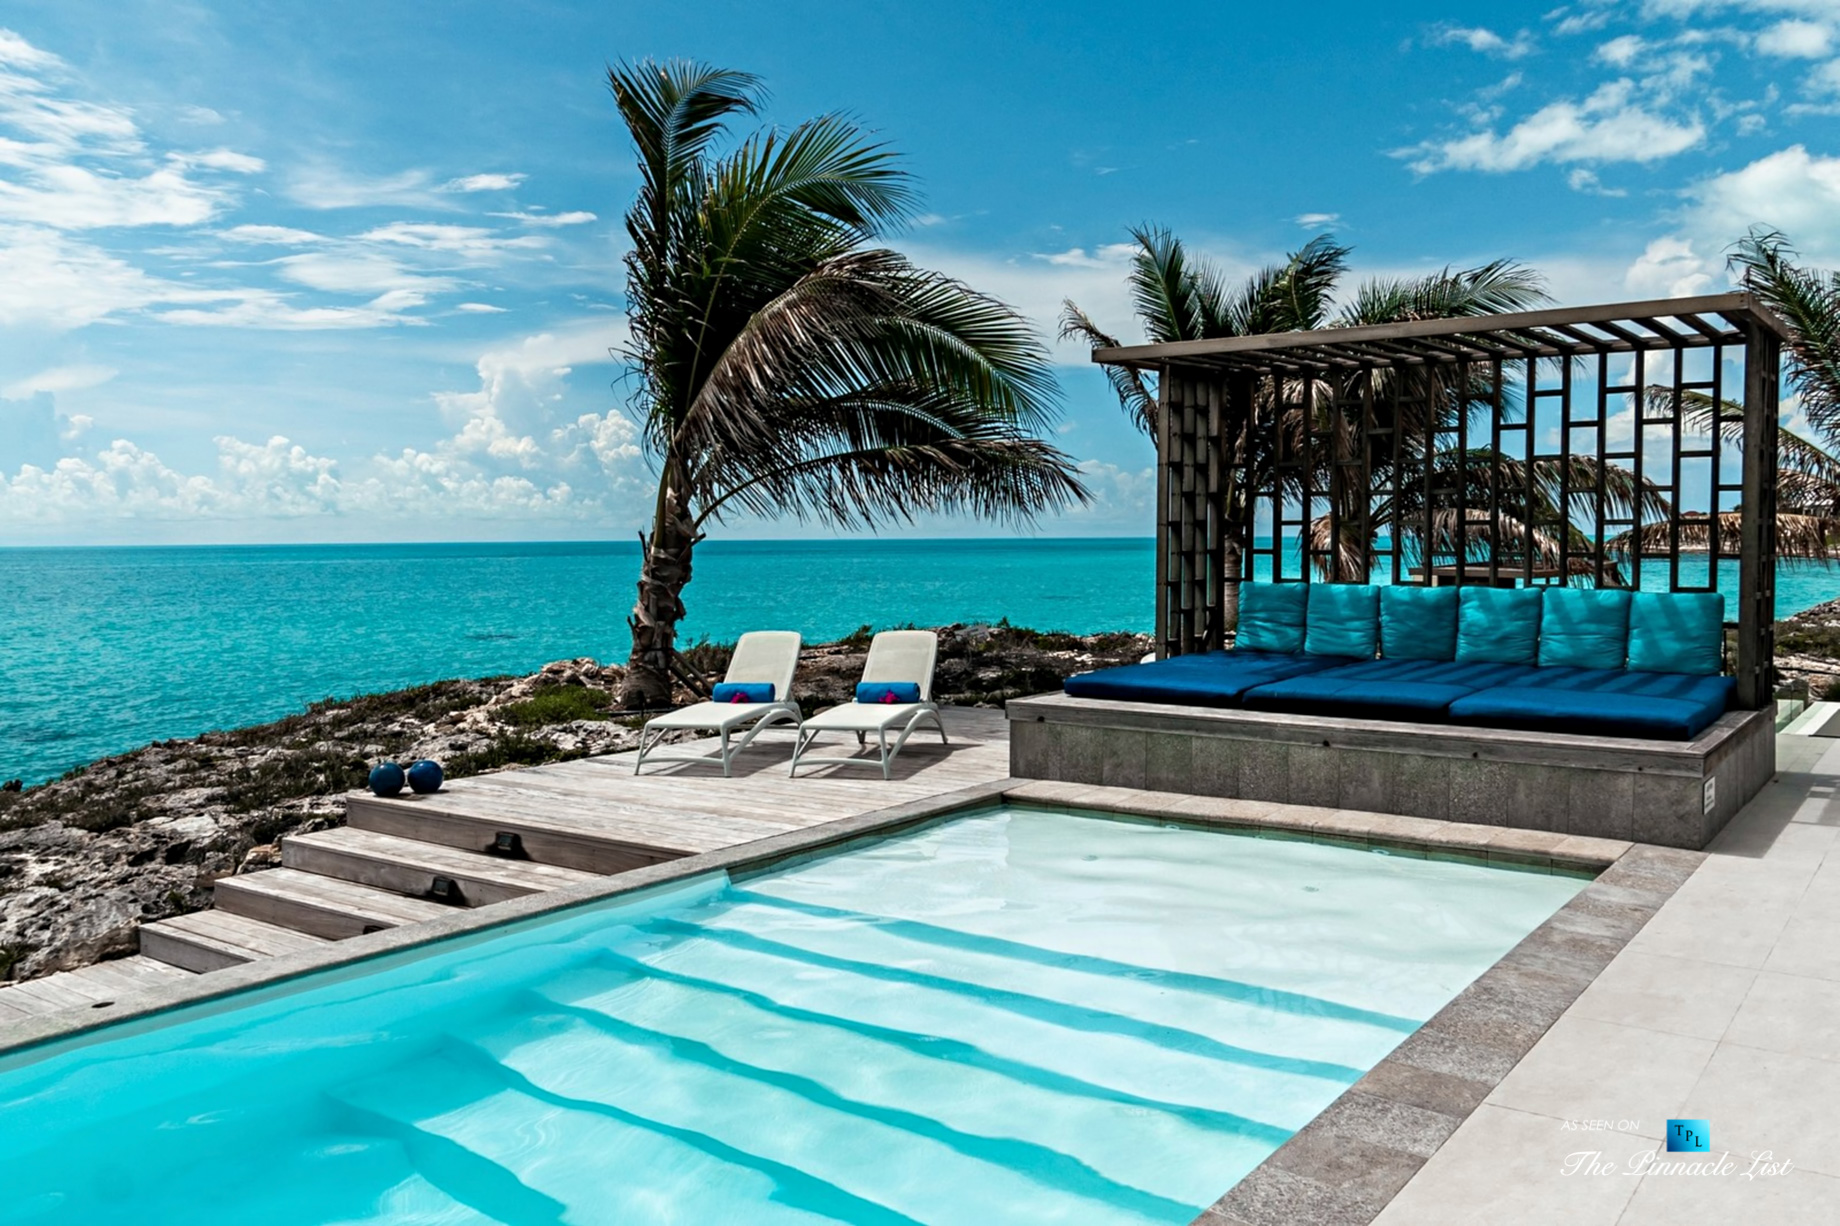 Tip of the Tail Villa - Providenciales, Turks and Caicos Islands - Caribbean Ocean View Infinity Pool - Luxury Real Estate - South Shore Peninsula Home